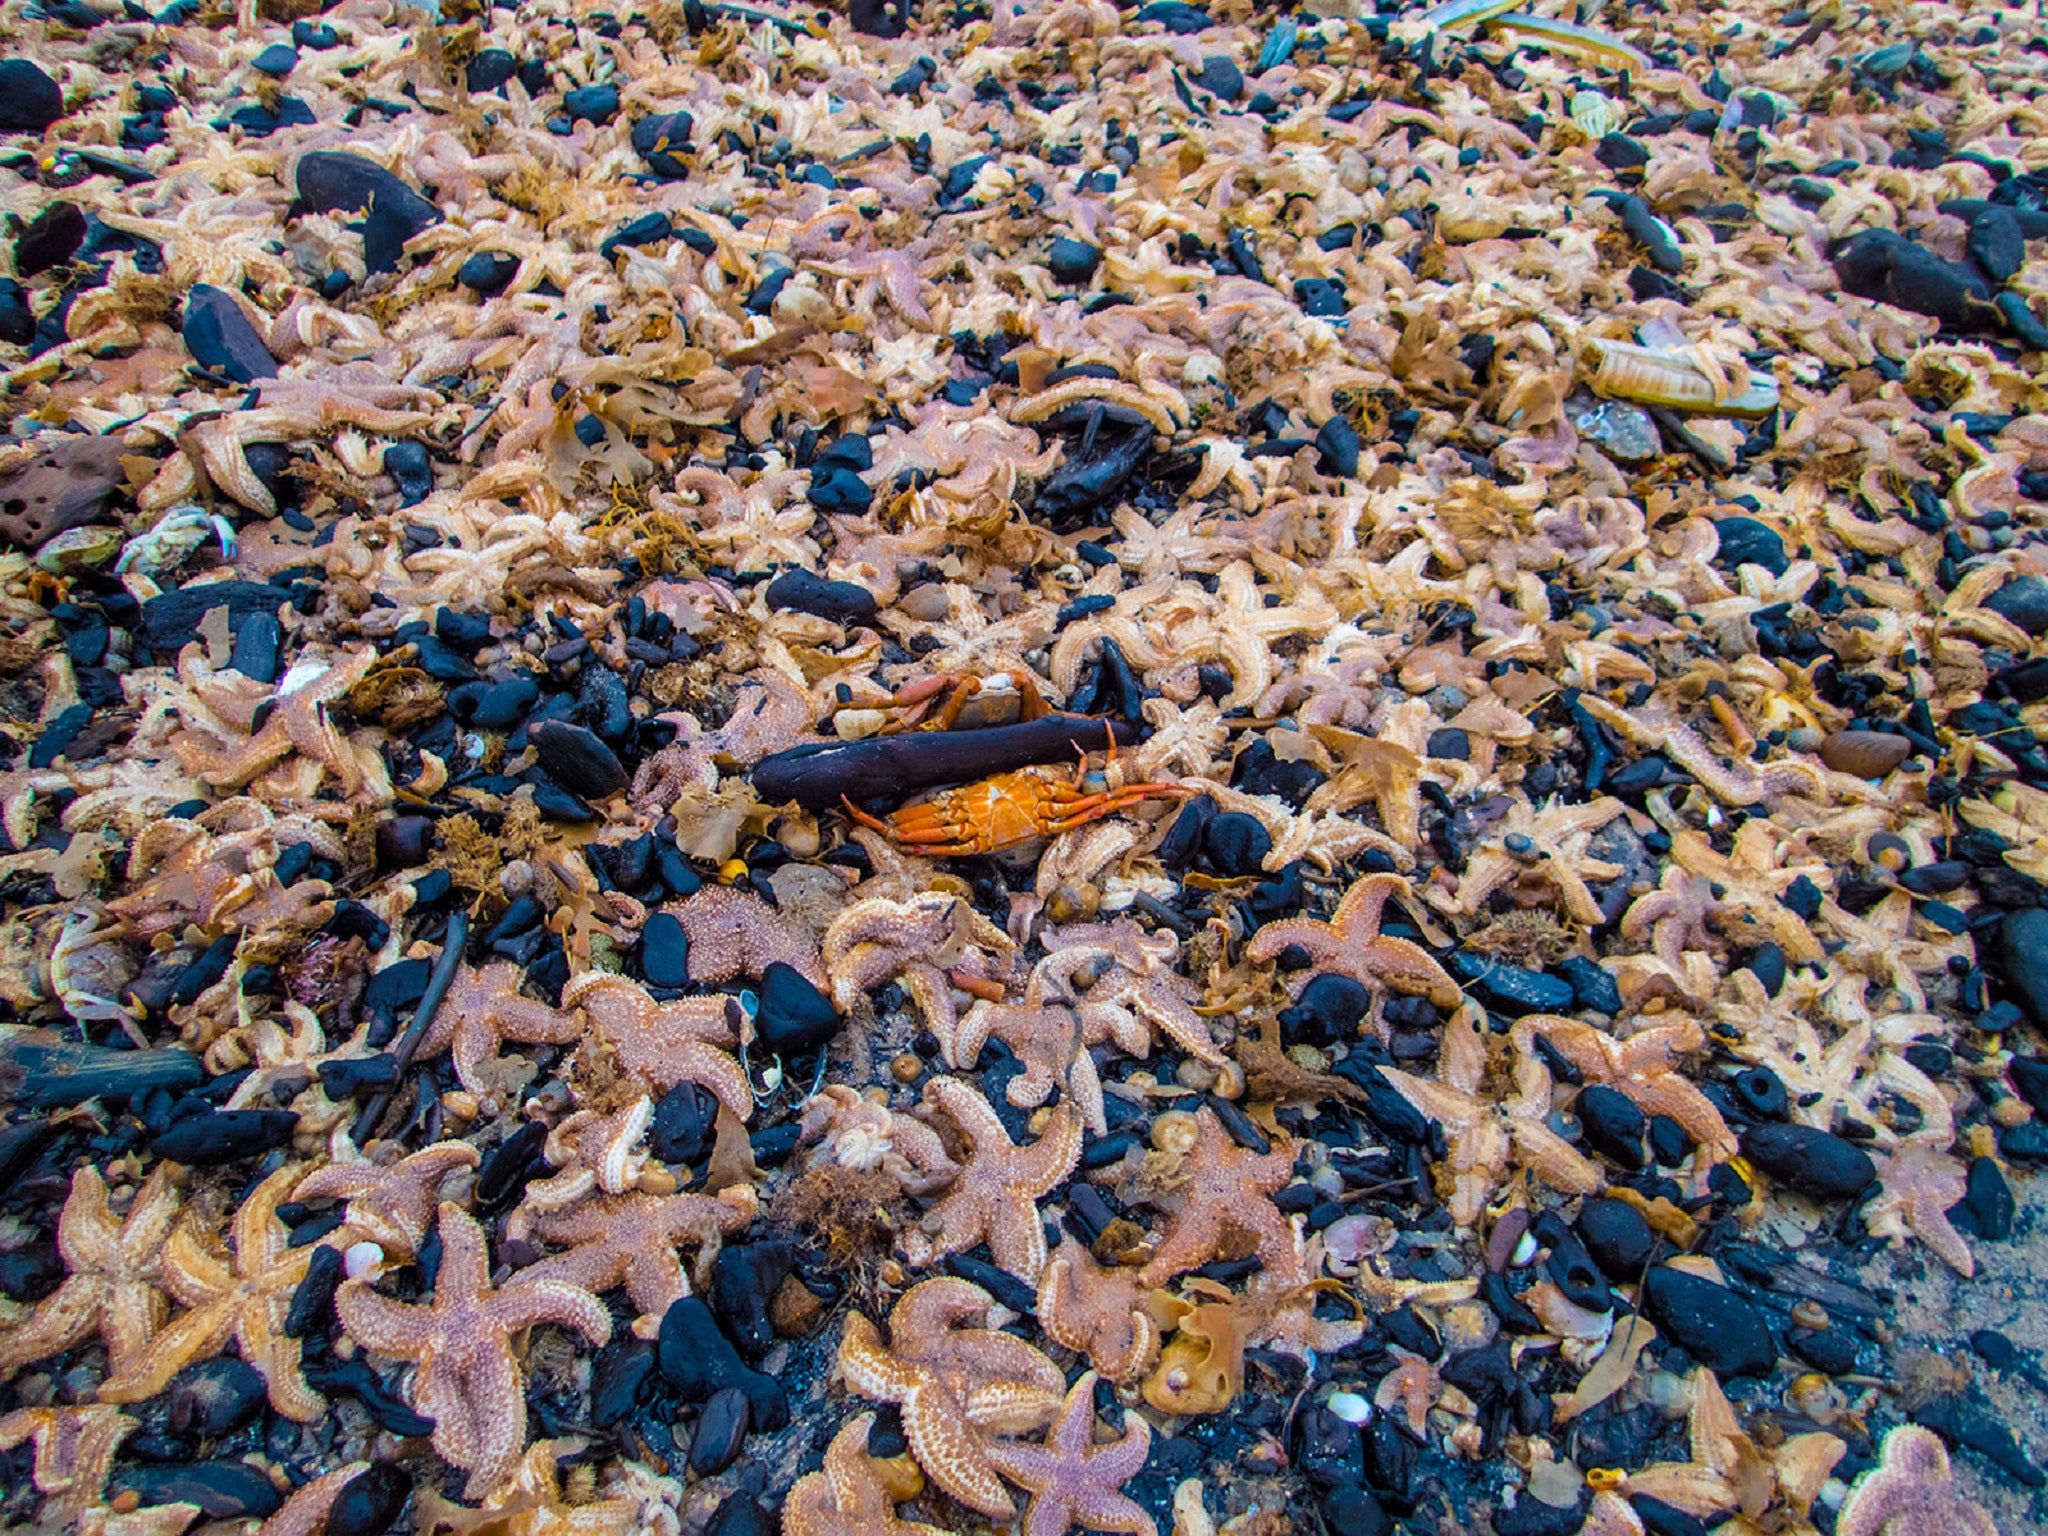 Tens of thousands of starfish washed up on on the beach at Mablethorpe, Lincolnshire, after stormy weather.